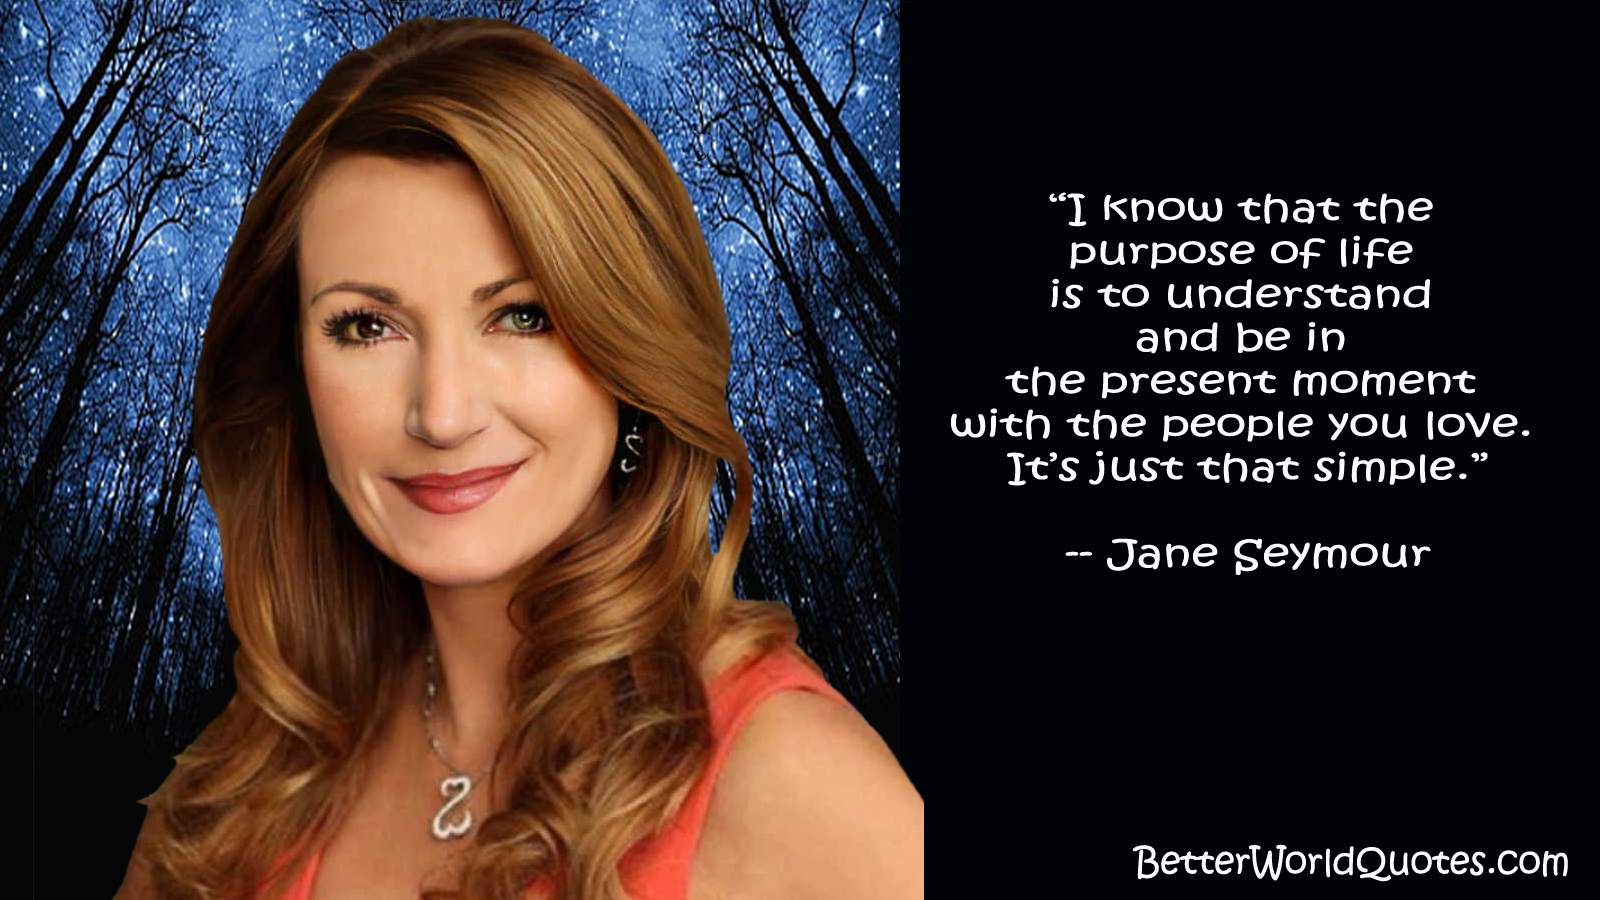 Jane Seymour - I know that the purpose of life is to understand and be in the present moment with the people you love. Its just that simple.
- Jane Seymour